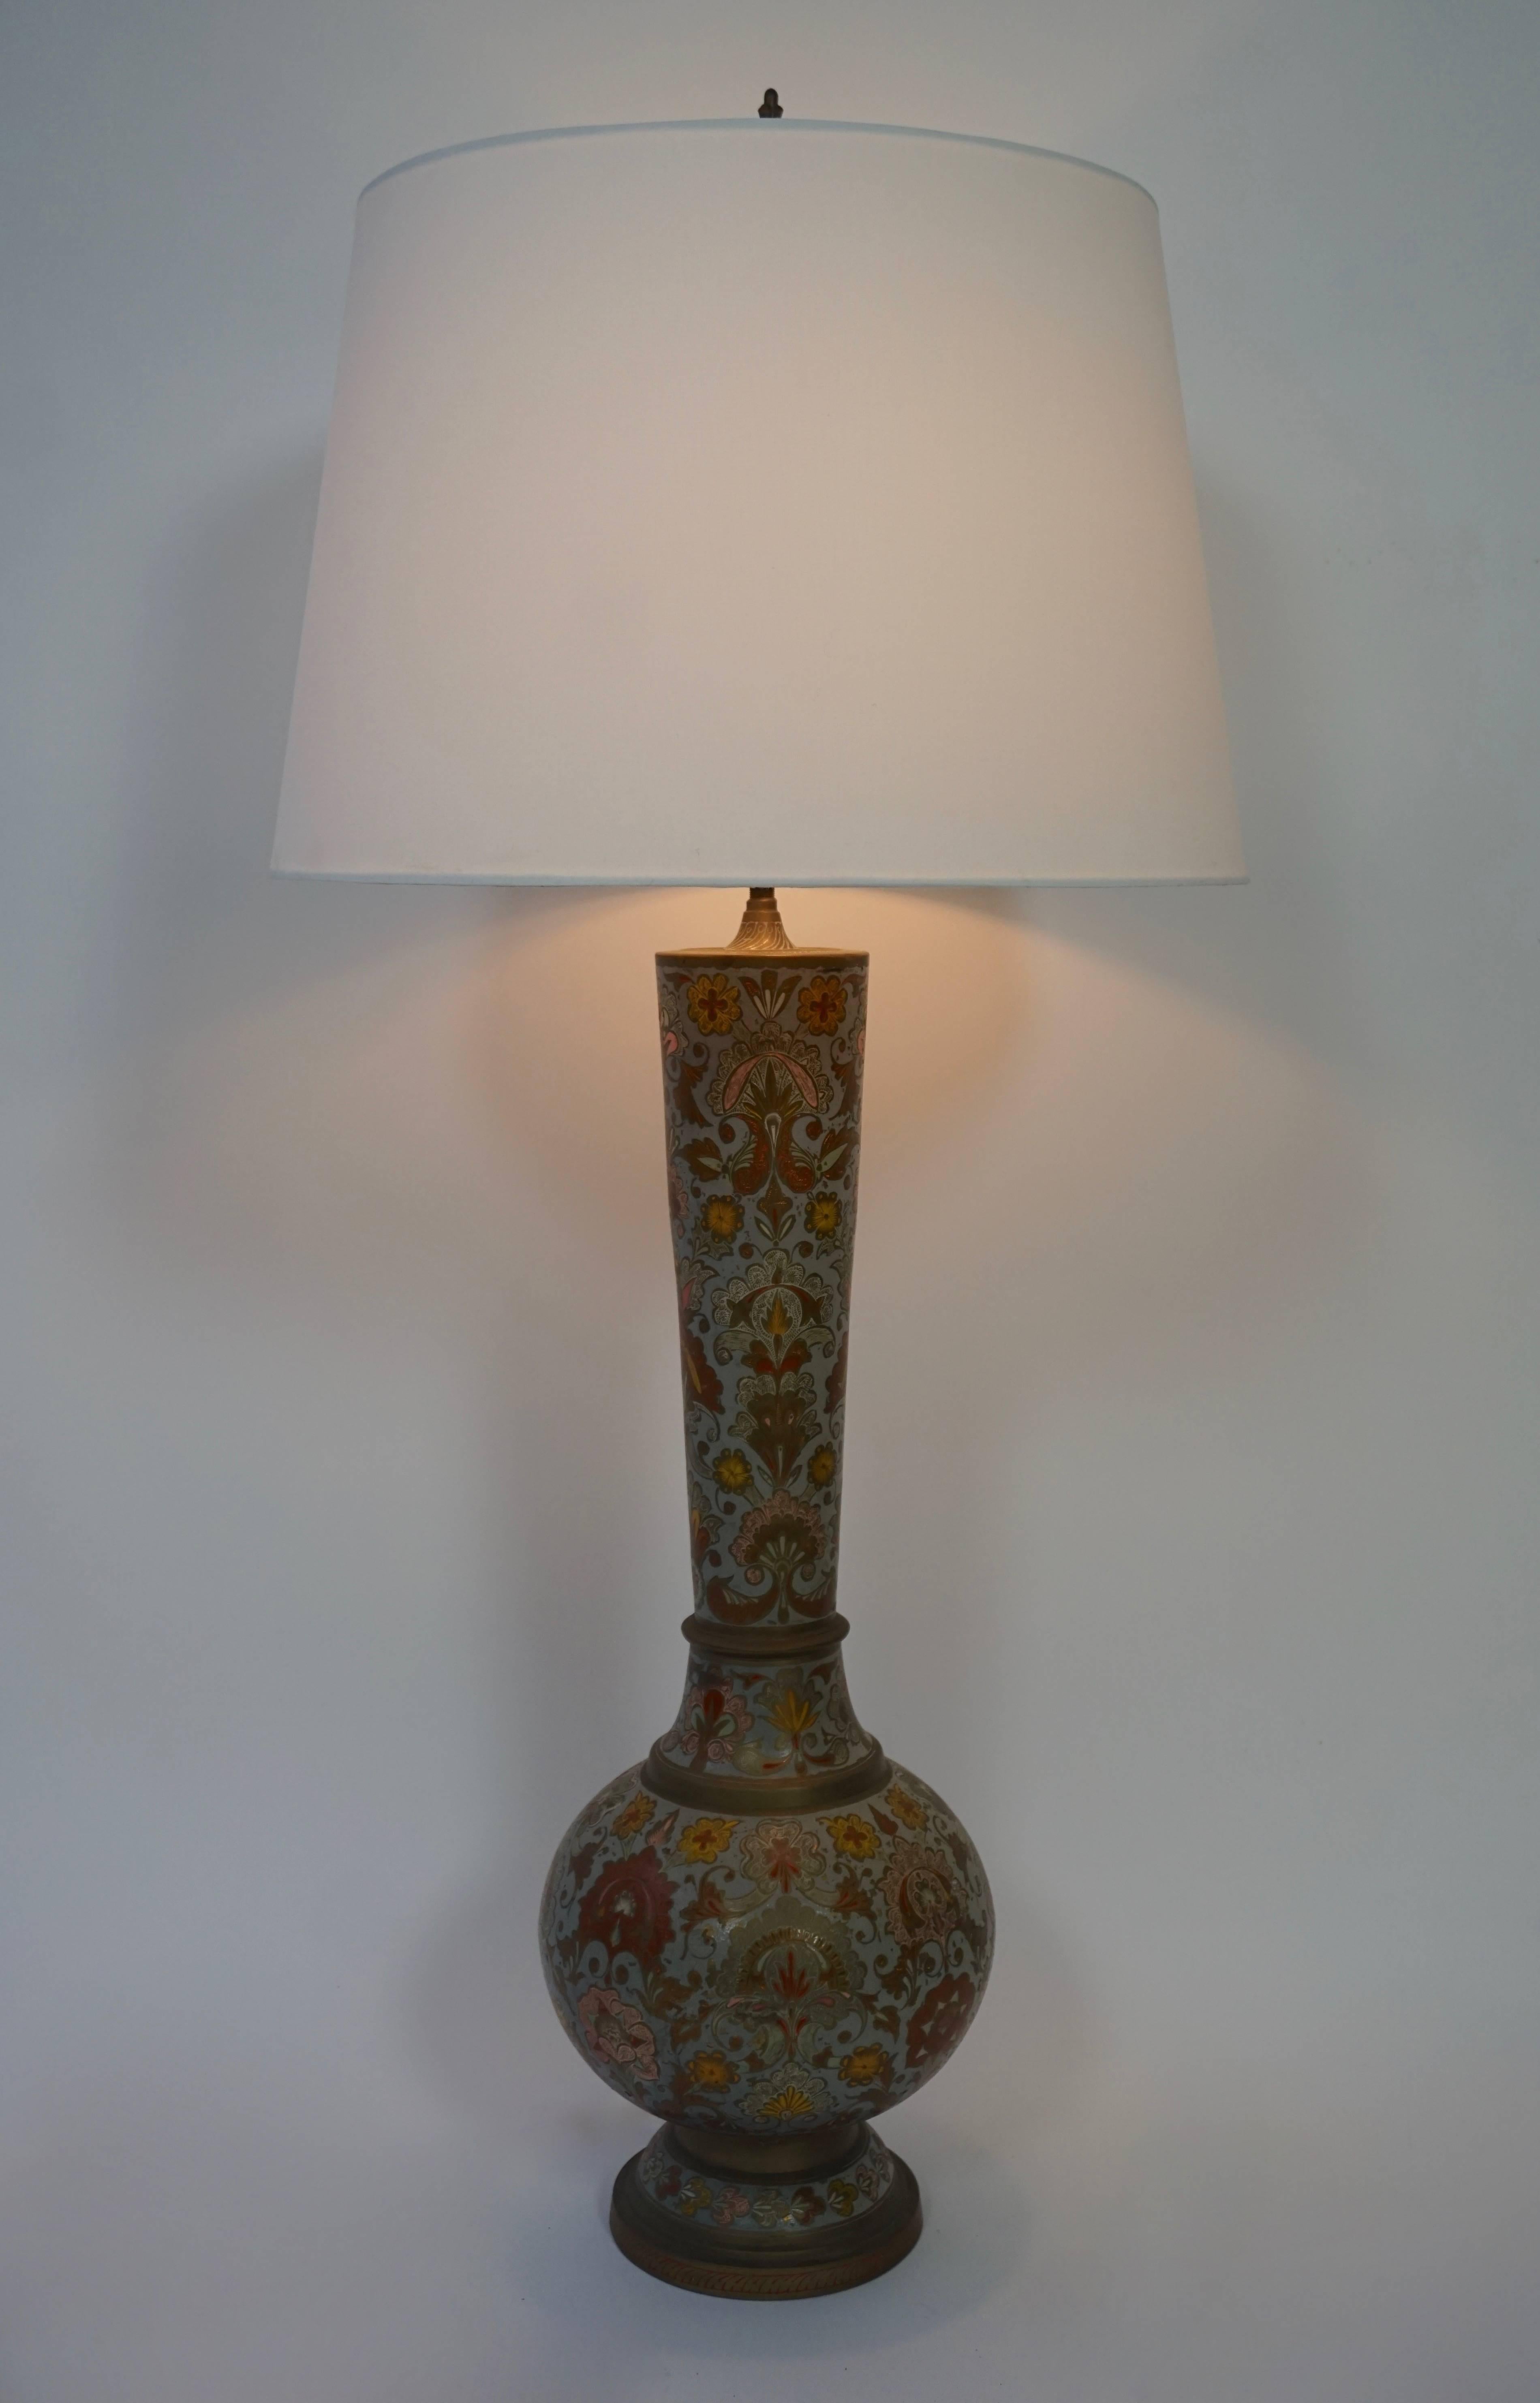 An elegant early 20 century cloisonné table lamp. A rich Licht blue with floral motif and brass hardware.
Measures: Height 114 cm,
diameter base 22 cm,
diameter shade 45 cm,
height shade 30 cm,
shade is not included in the price.